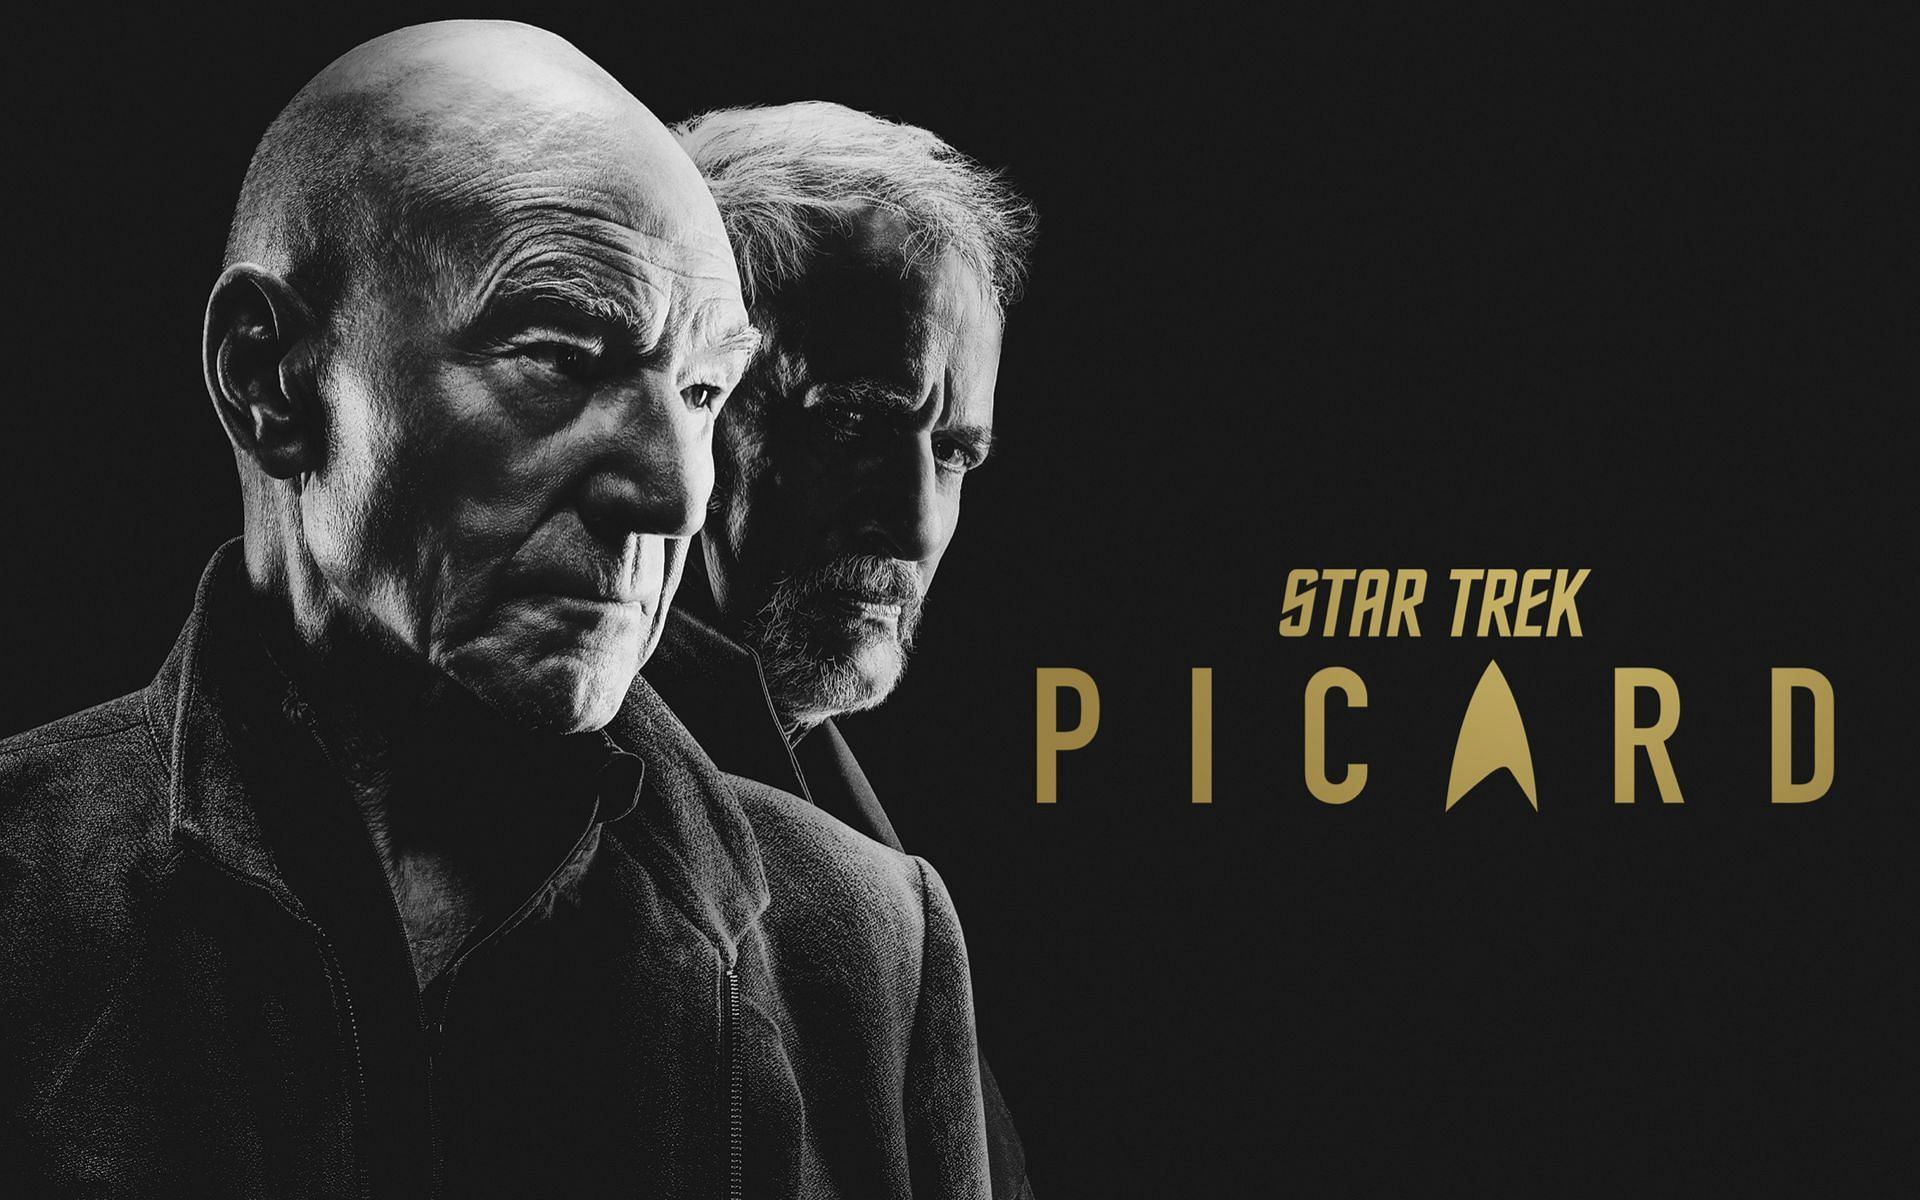 Episode 10 of Star Trek: Picard Season 2 will be released on Paramount+ on Thursday, May 5, 2022, at 12 am PT (Image via Amazon Prime Video)